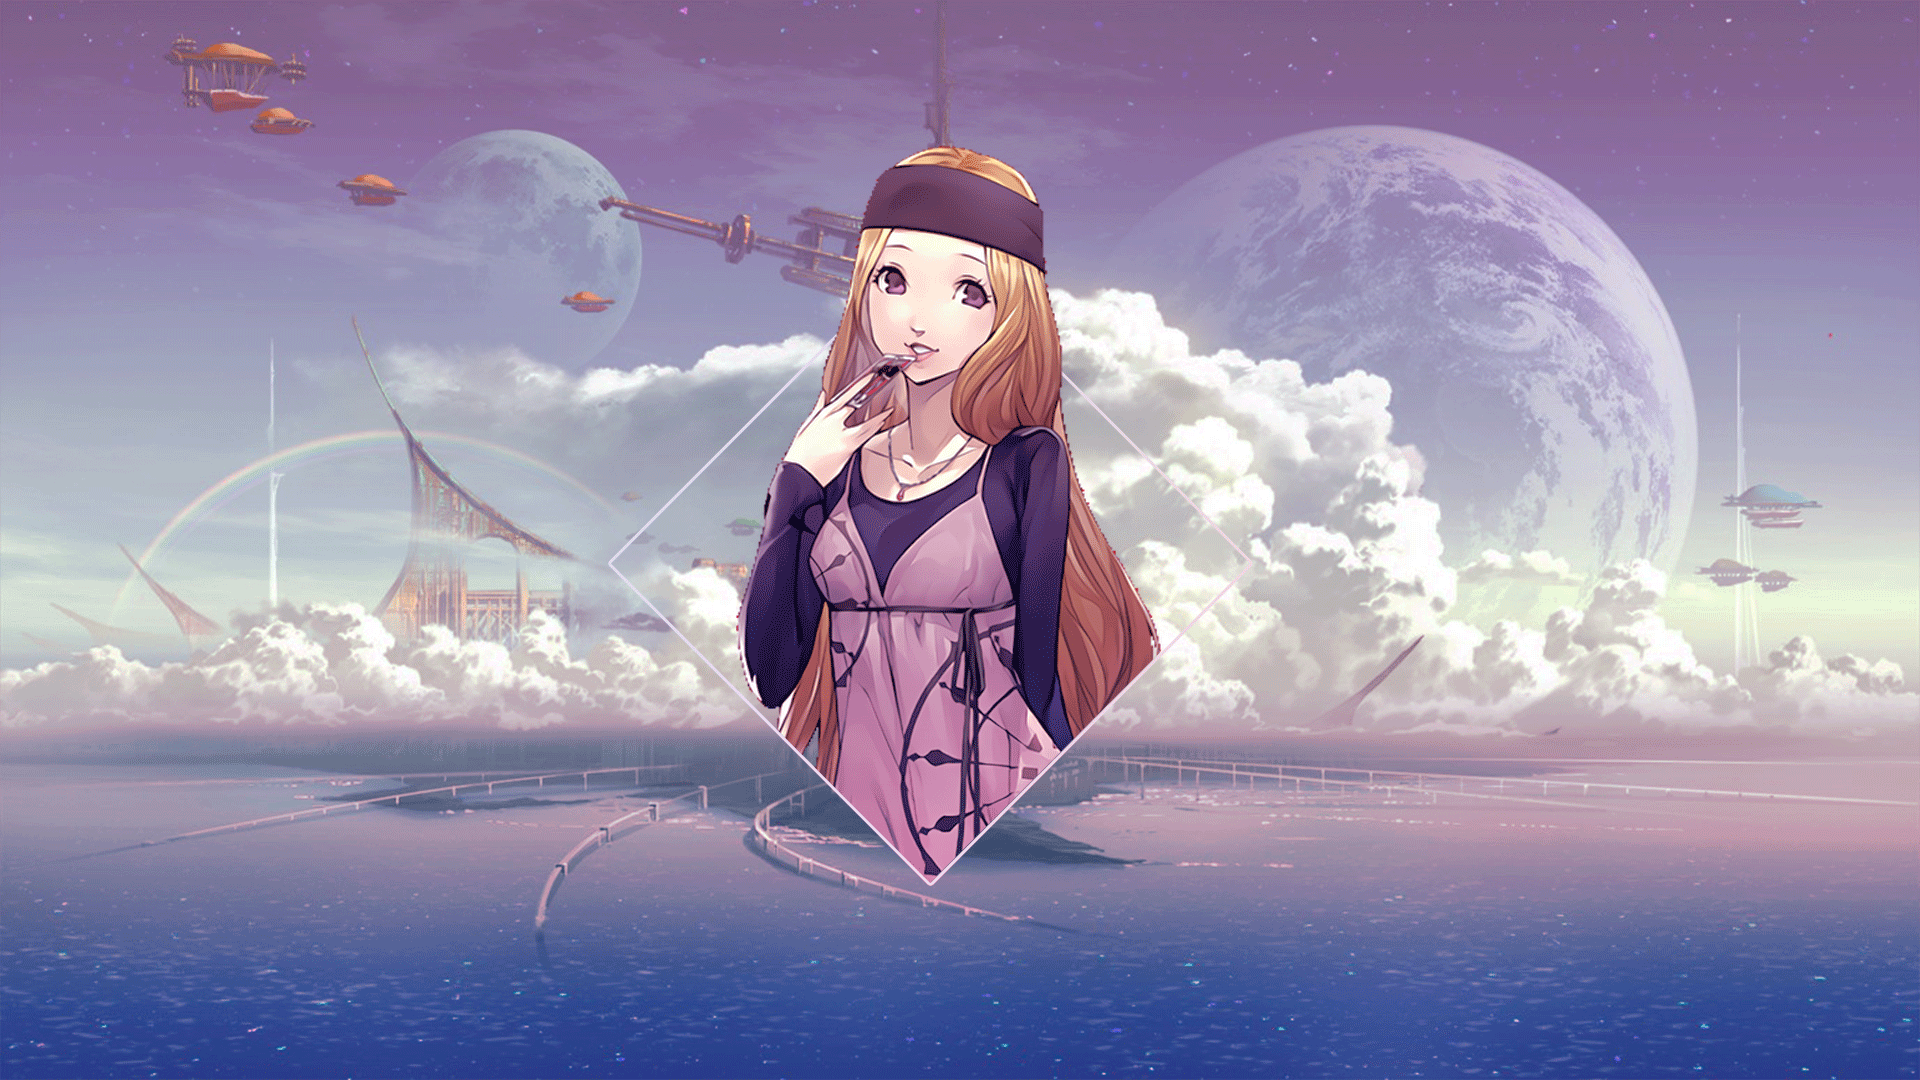 Anime 1920x1080 anime anime girls Chihaya Mifune Persona 5 digital art picture-in-picture ocean view clouds video games Persona series